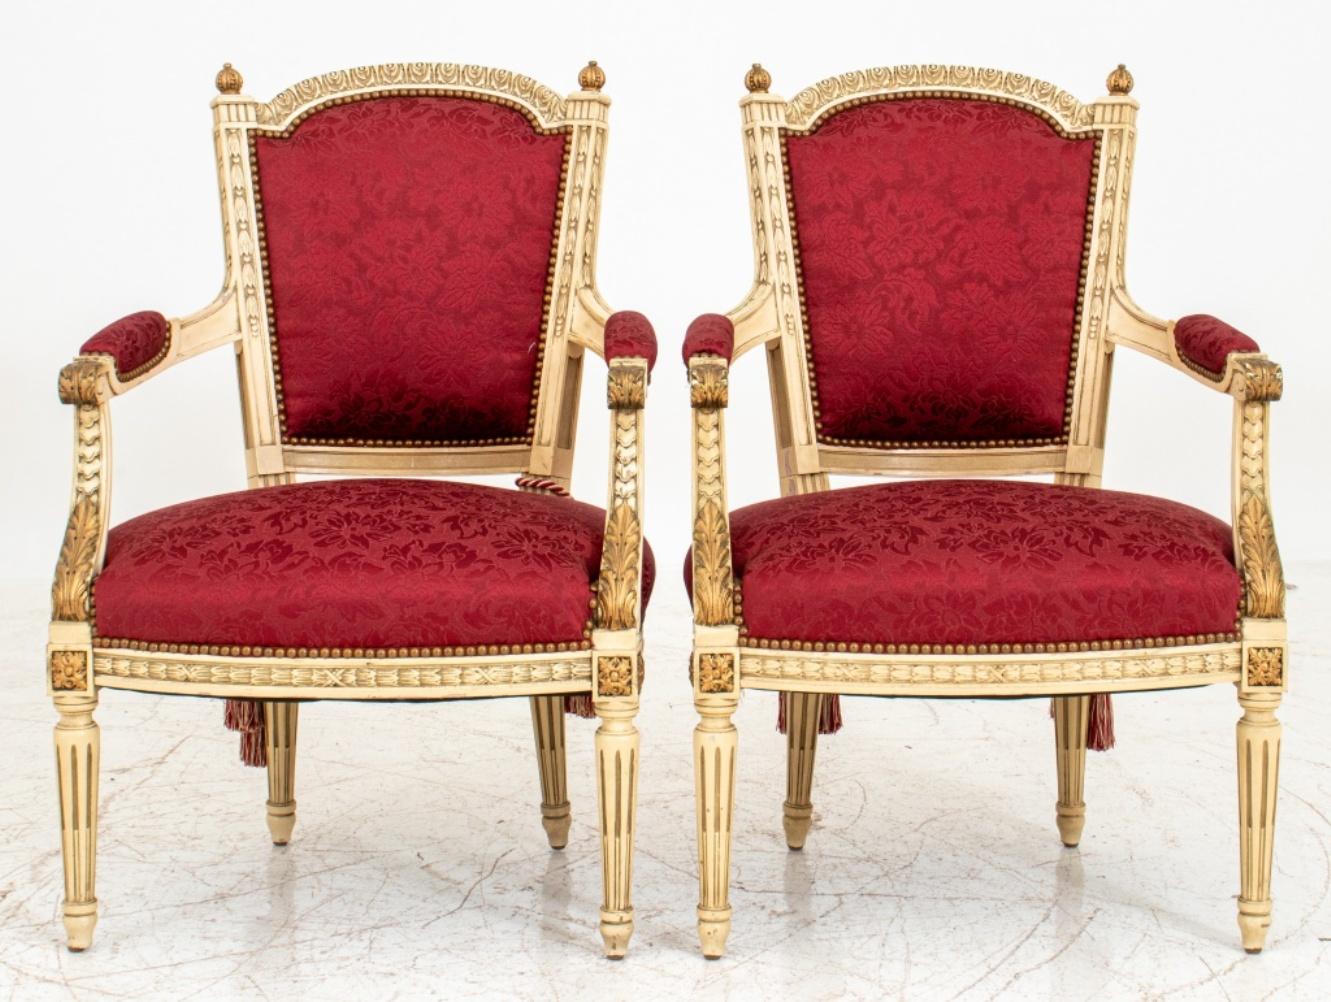 Pair of Louis XVI style red damask upholstered gold and white painted arm chairs or fauteuils de la reine en cabriolet, with arched crest rails and gilt finials above upholstered backs and down swept scrolling arms above a shaped rectangular seat